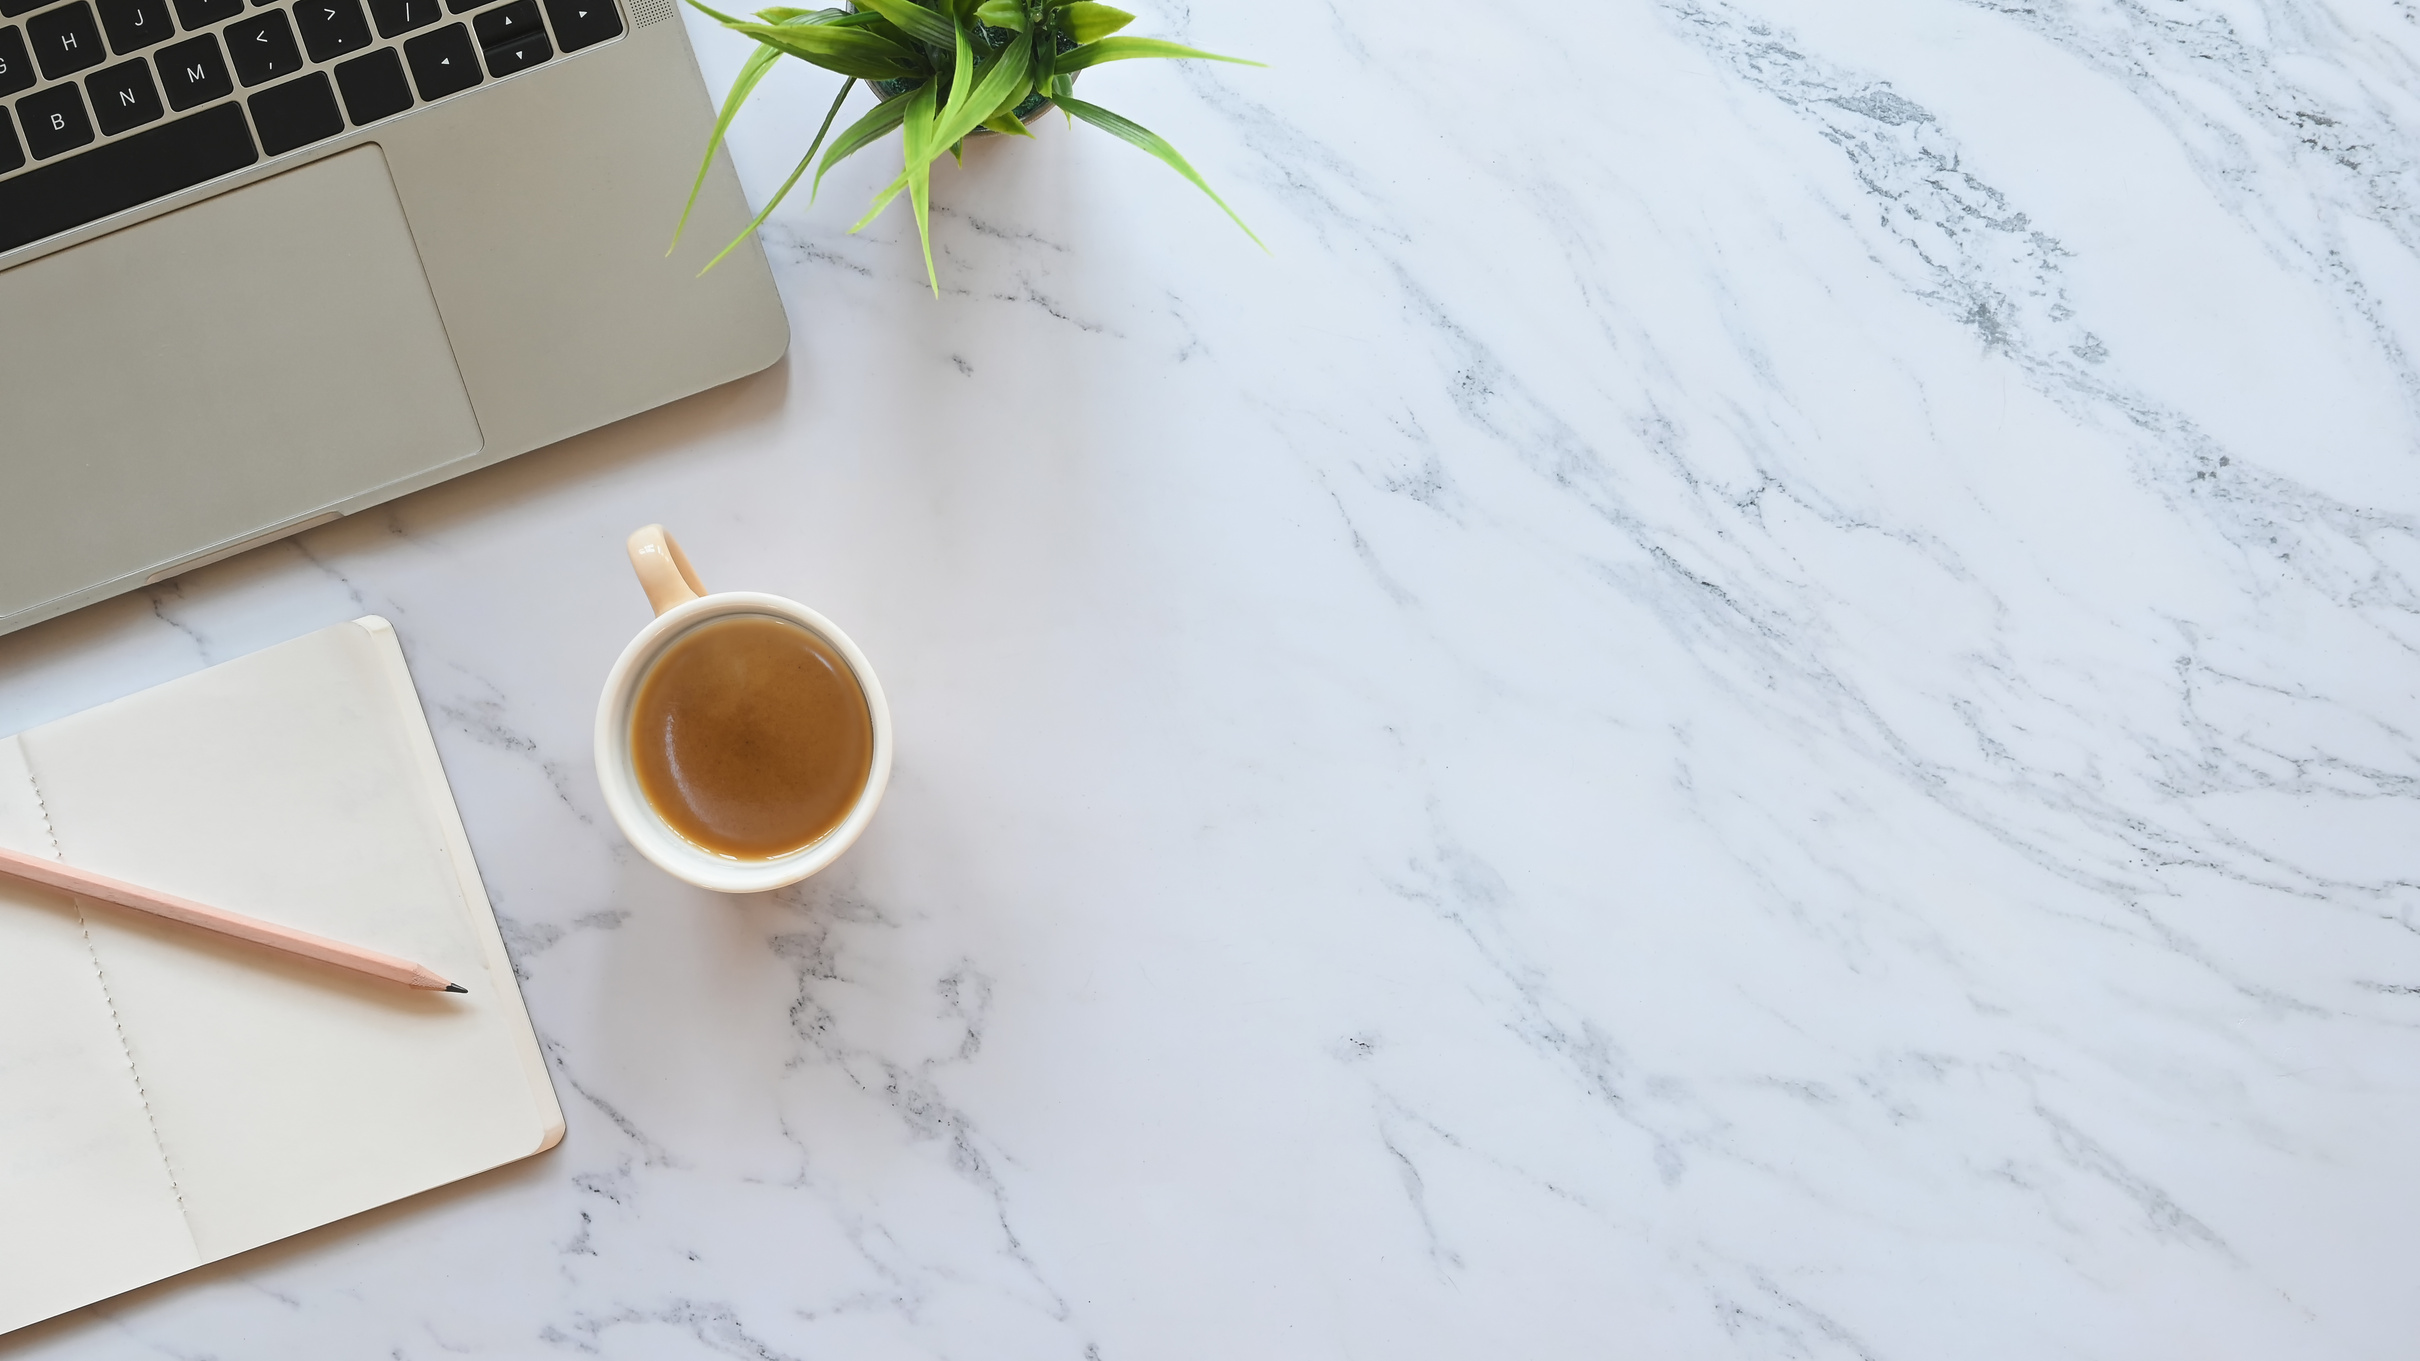 Coffee, Notebook and Laptop on Marble Desk Background